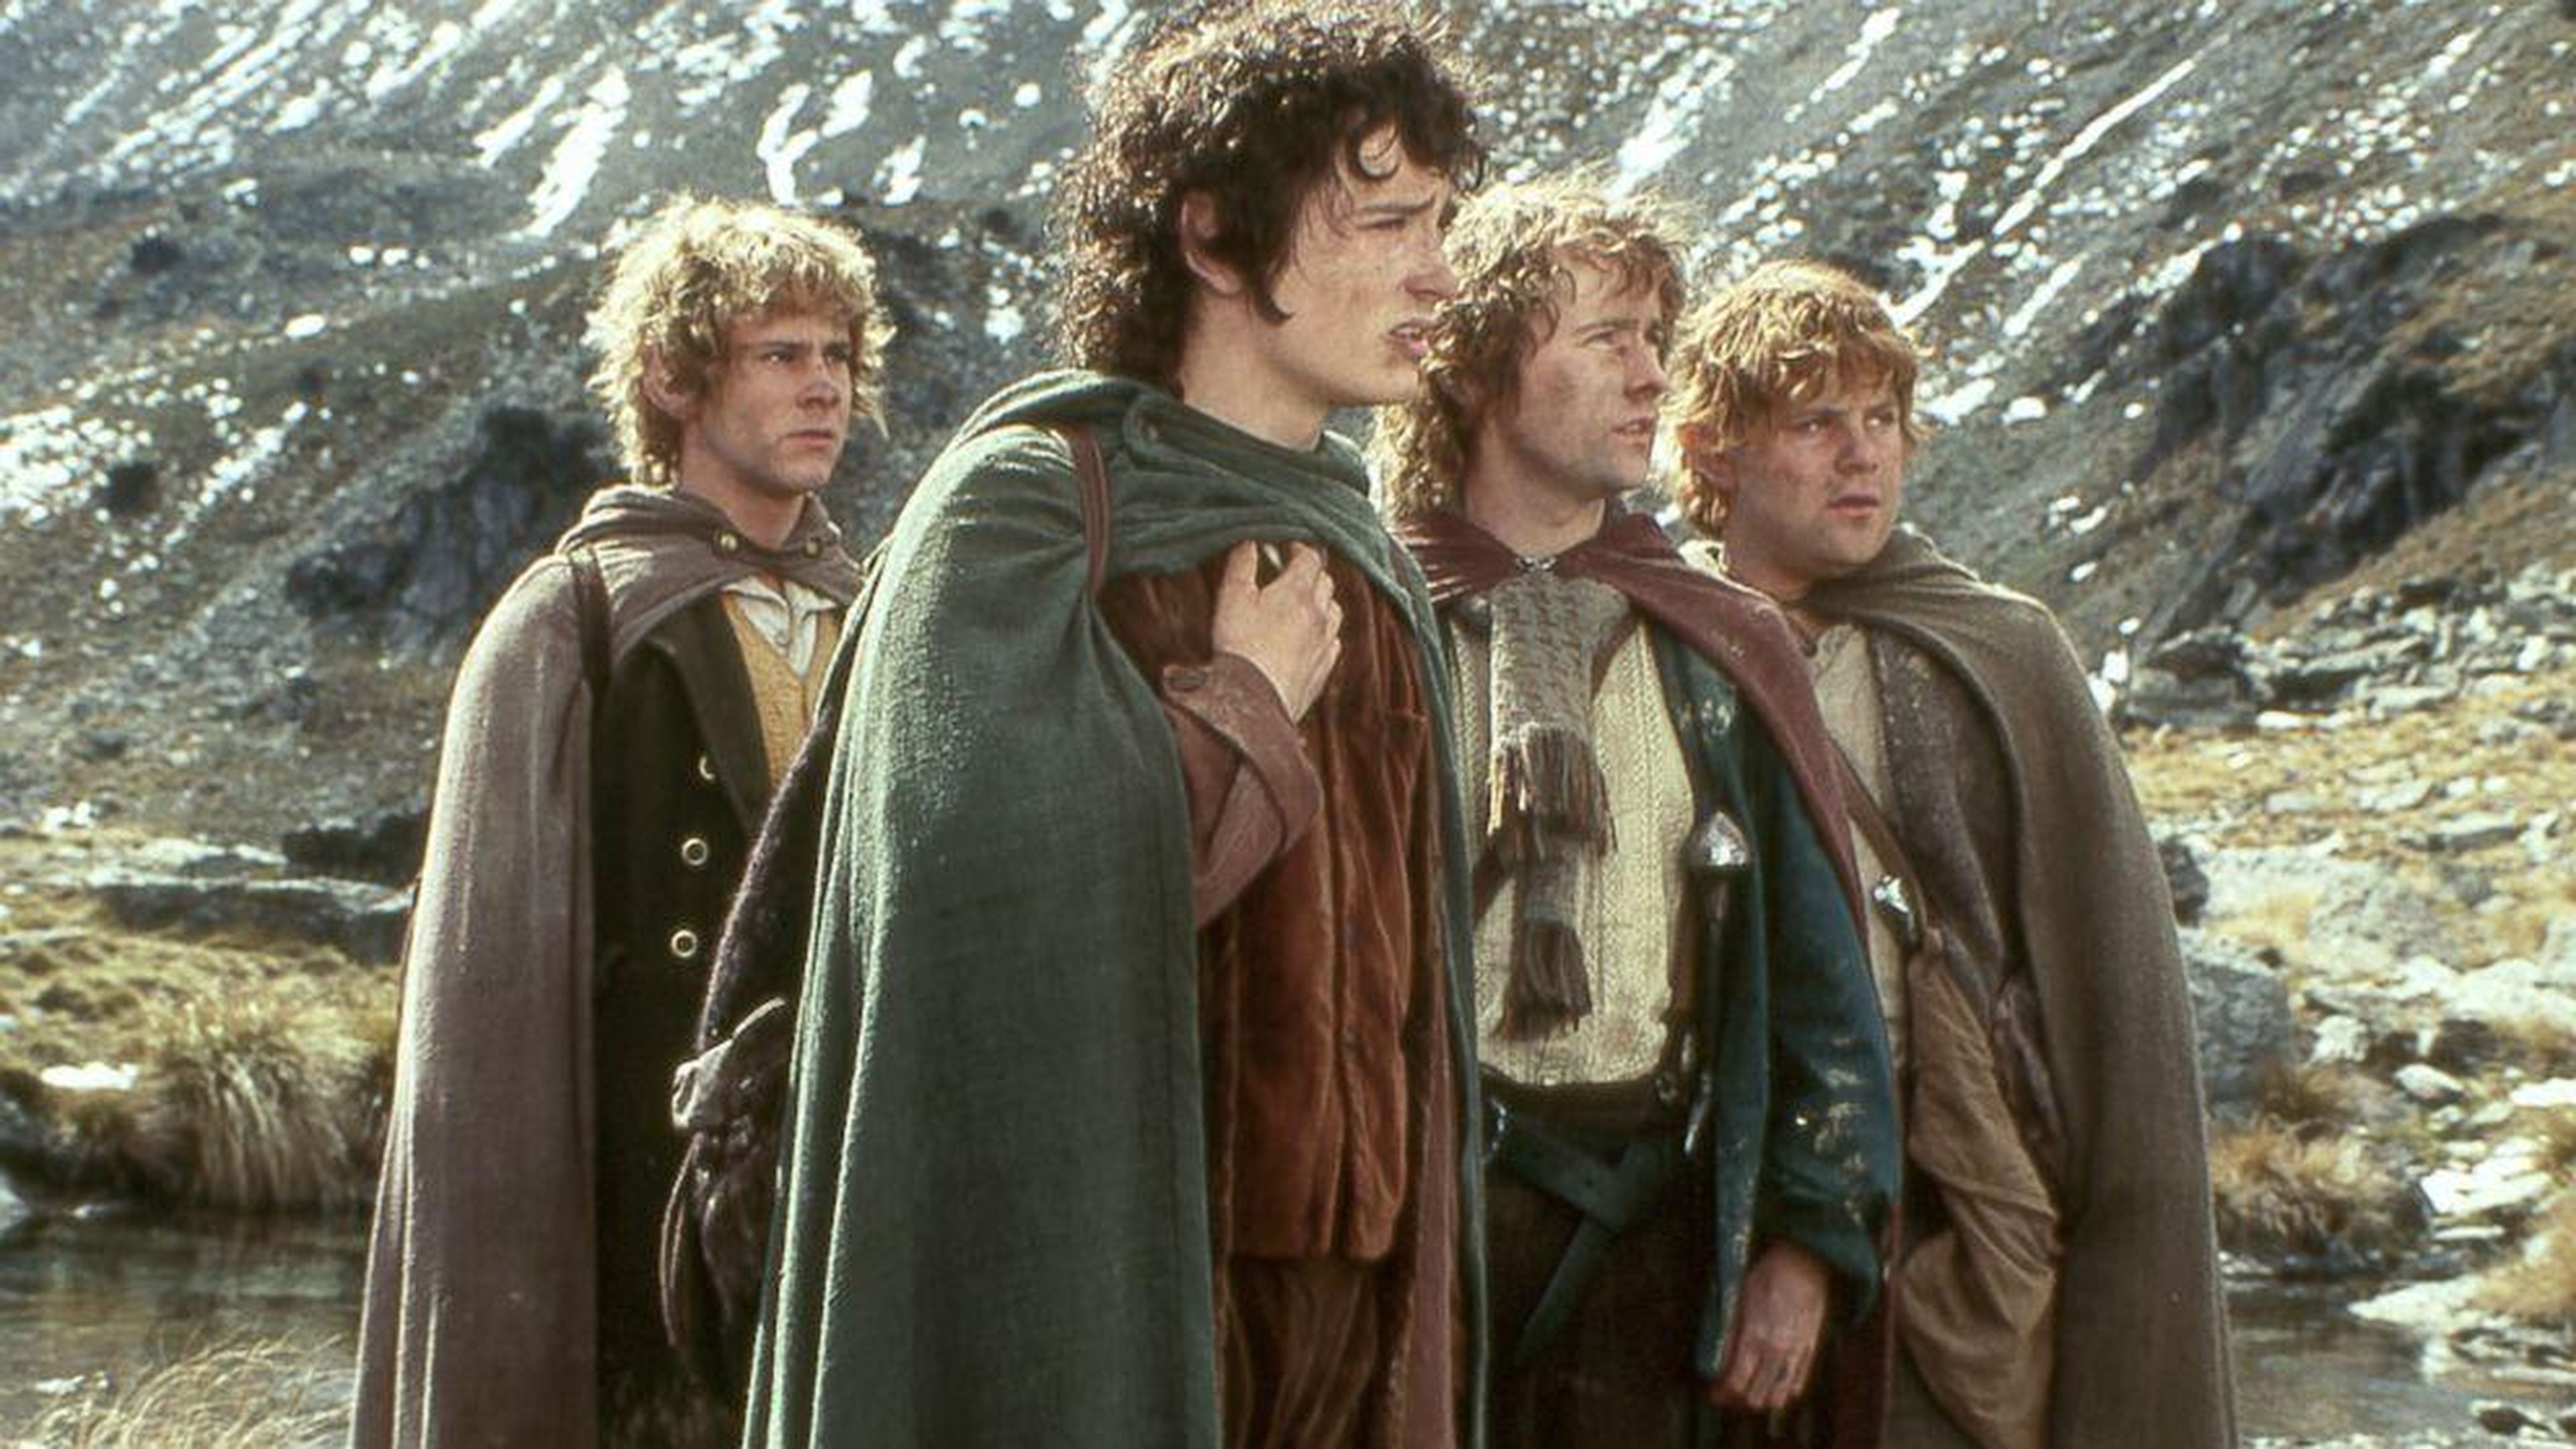 60. "The Lord of the Rings: The Fellowship of the Ring" (2001)